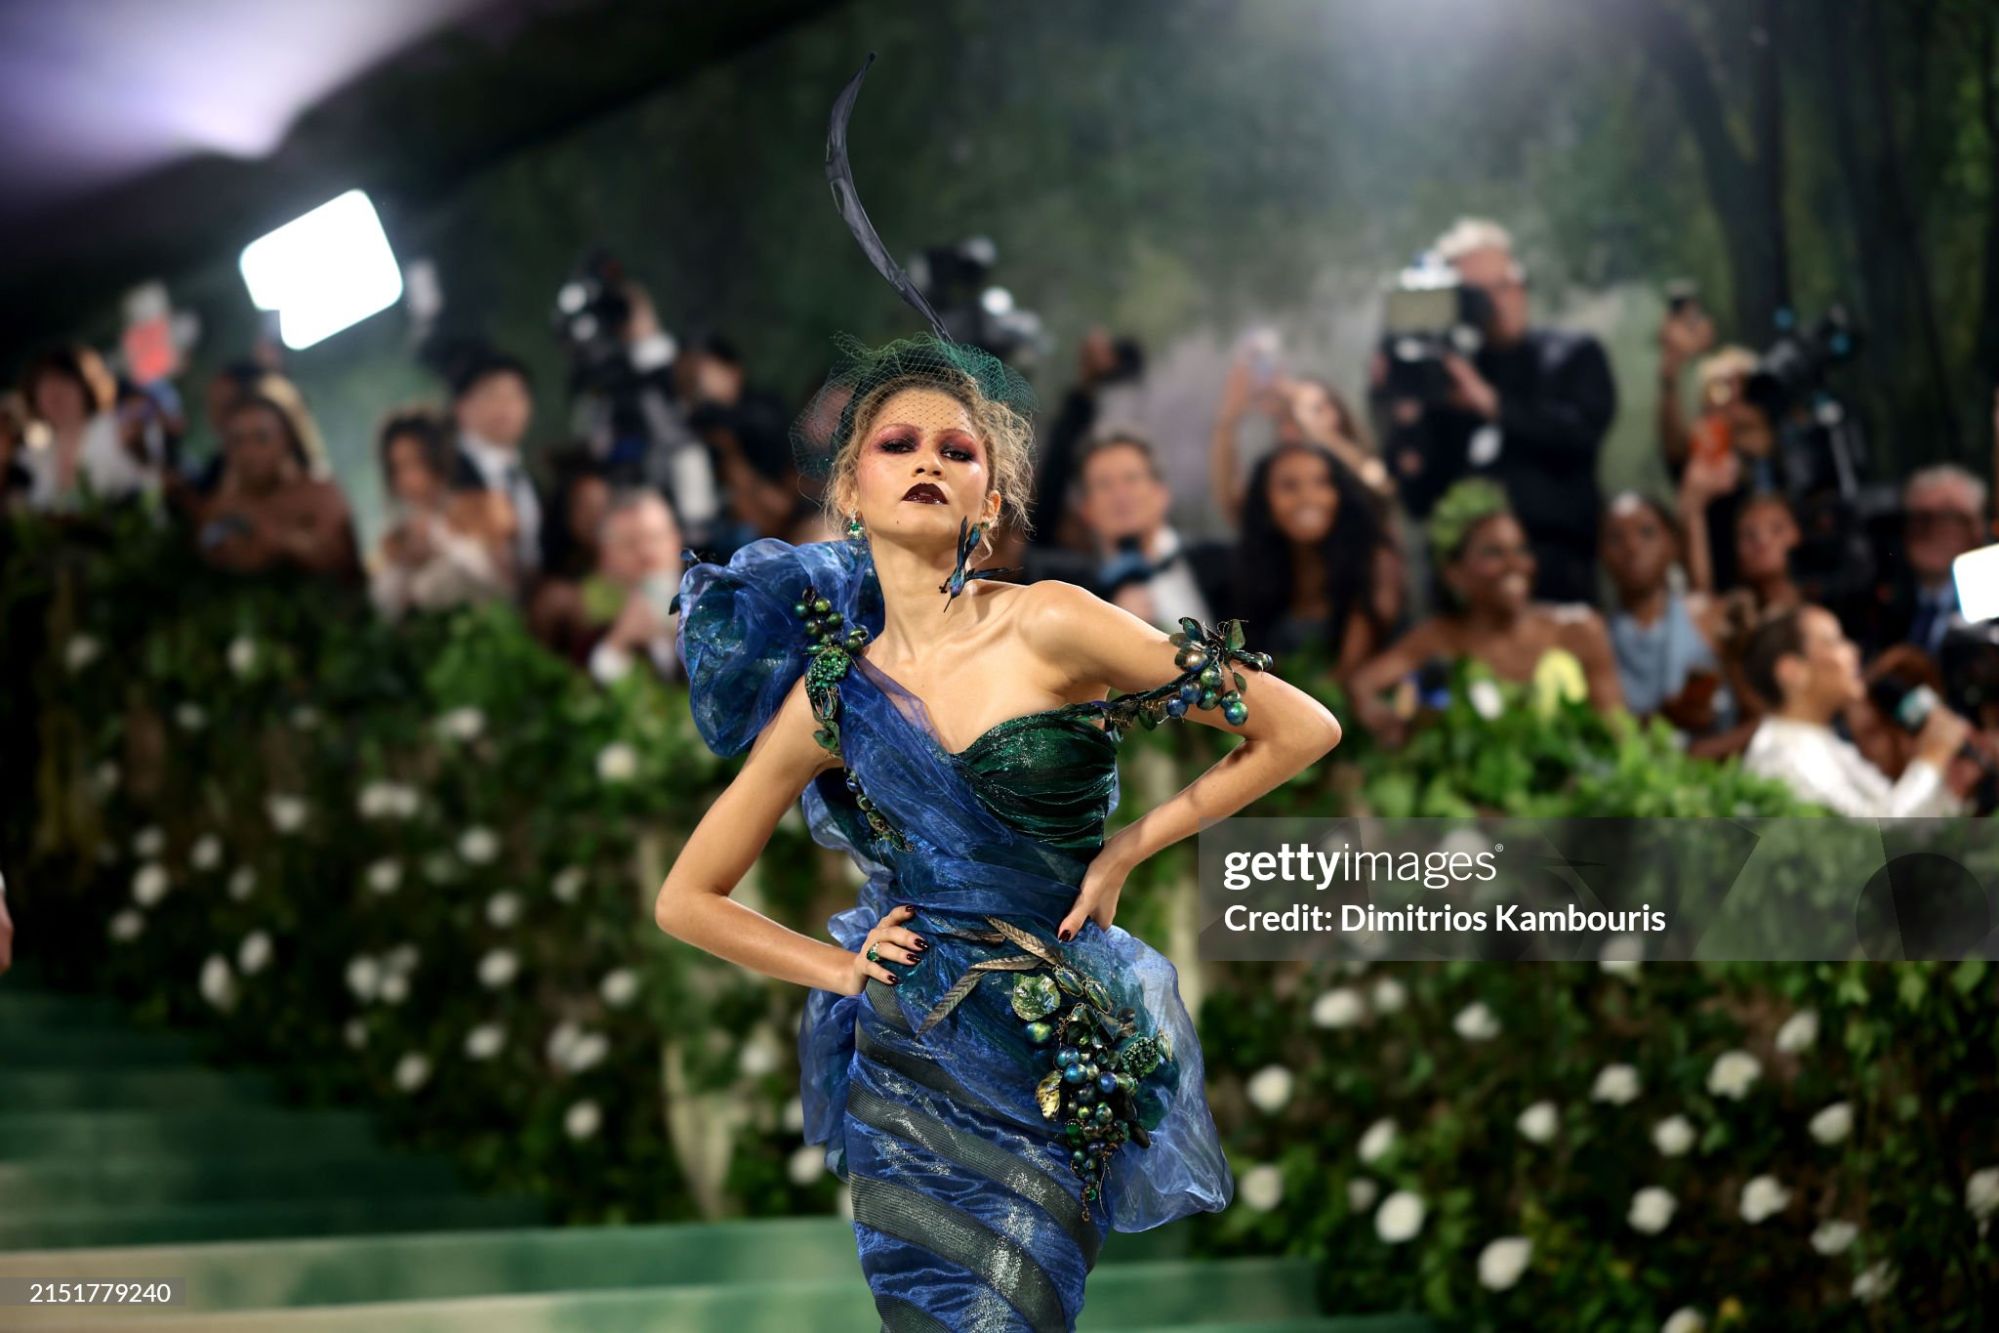 gettyimages-2151779240-2048x2048.jpg